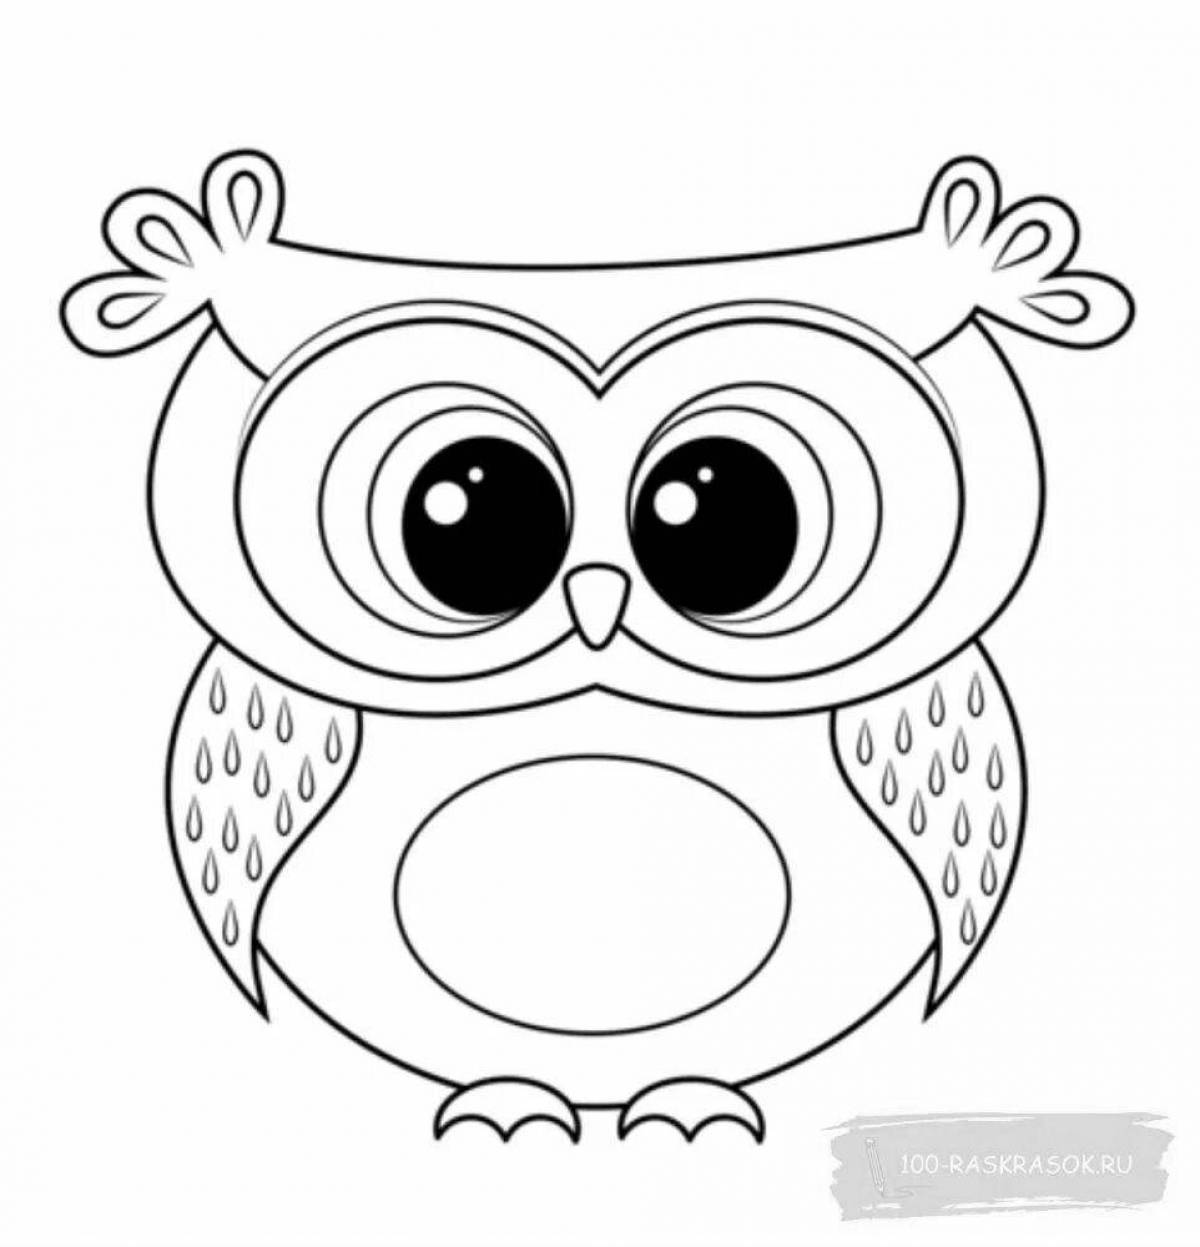 Amazing baby owlet coloring page